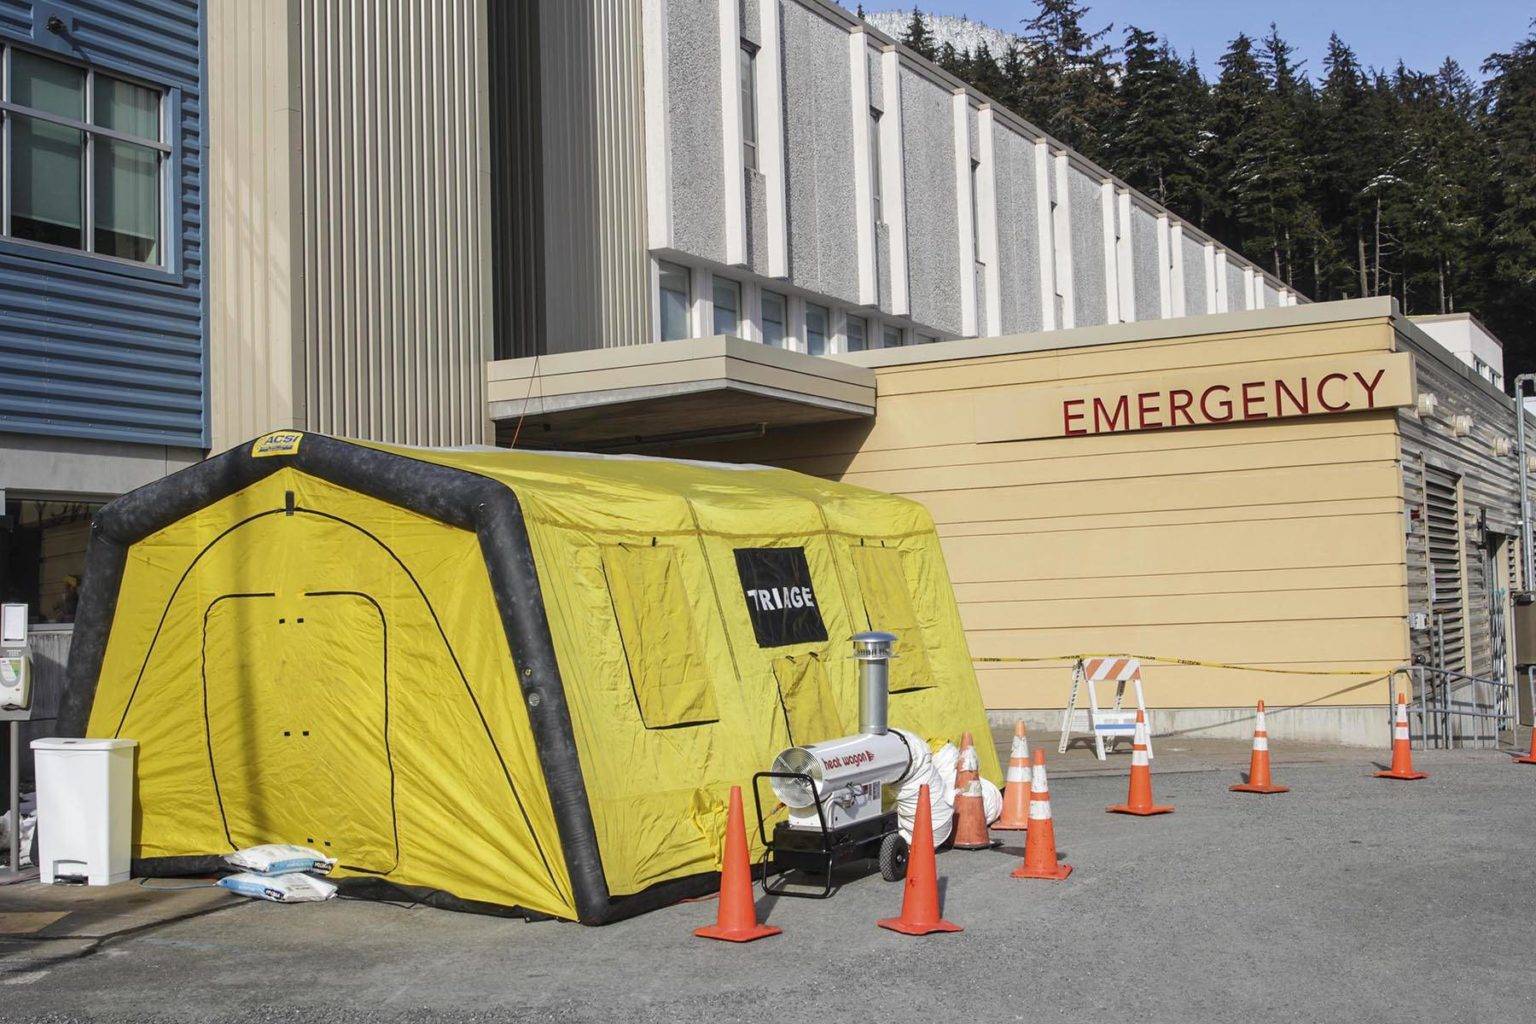 This temporary shelter was set up earlier this year outside Bartlett Regional Hospital was set up for the staff screening people entering the hospital. BRH wants to create a more permanent screening facility at hospital, as it considers renovations for handling COVID-19 in the longterm. (Michael Lockett / Juneau Empire File)